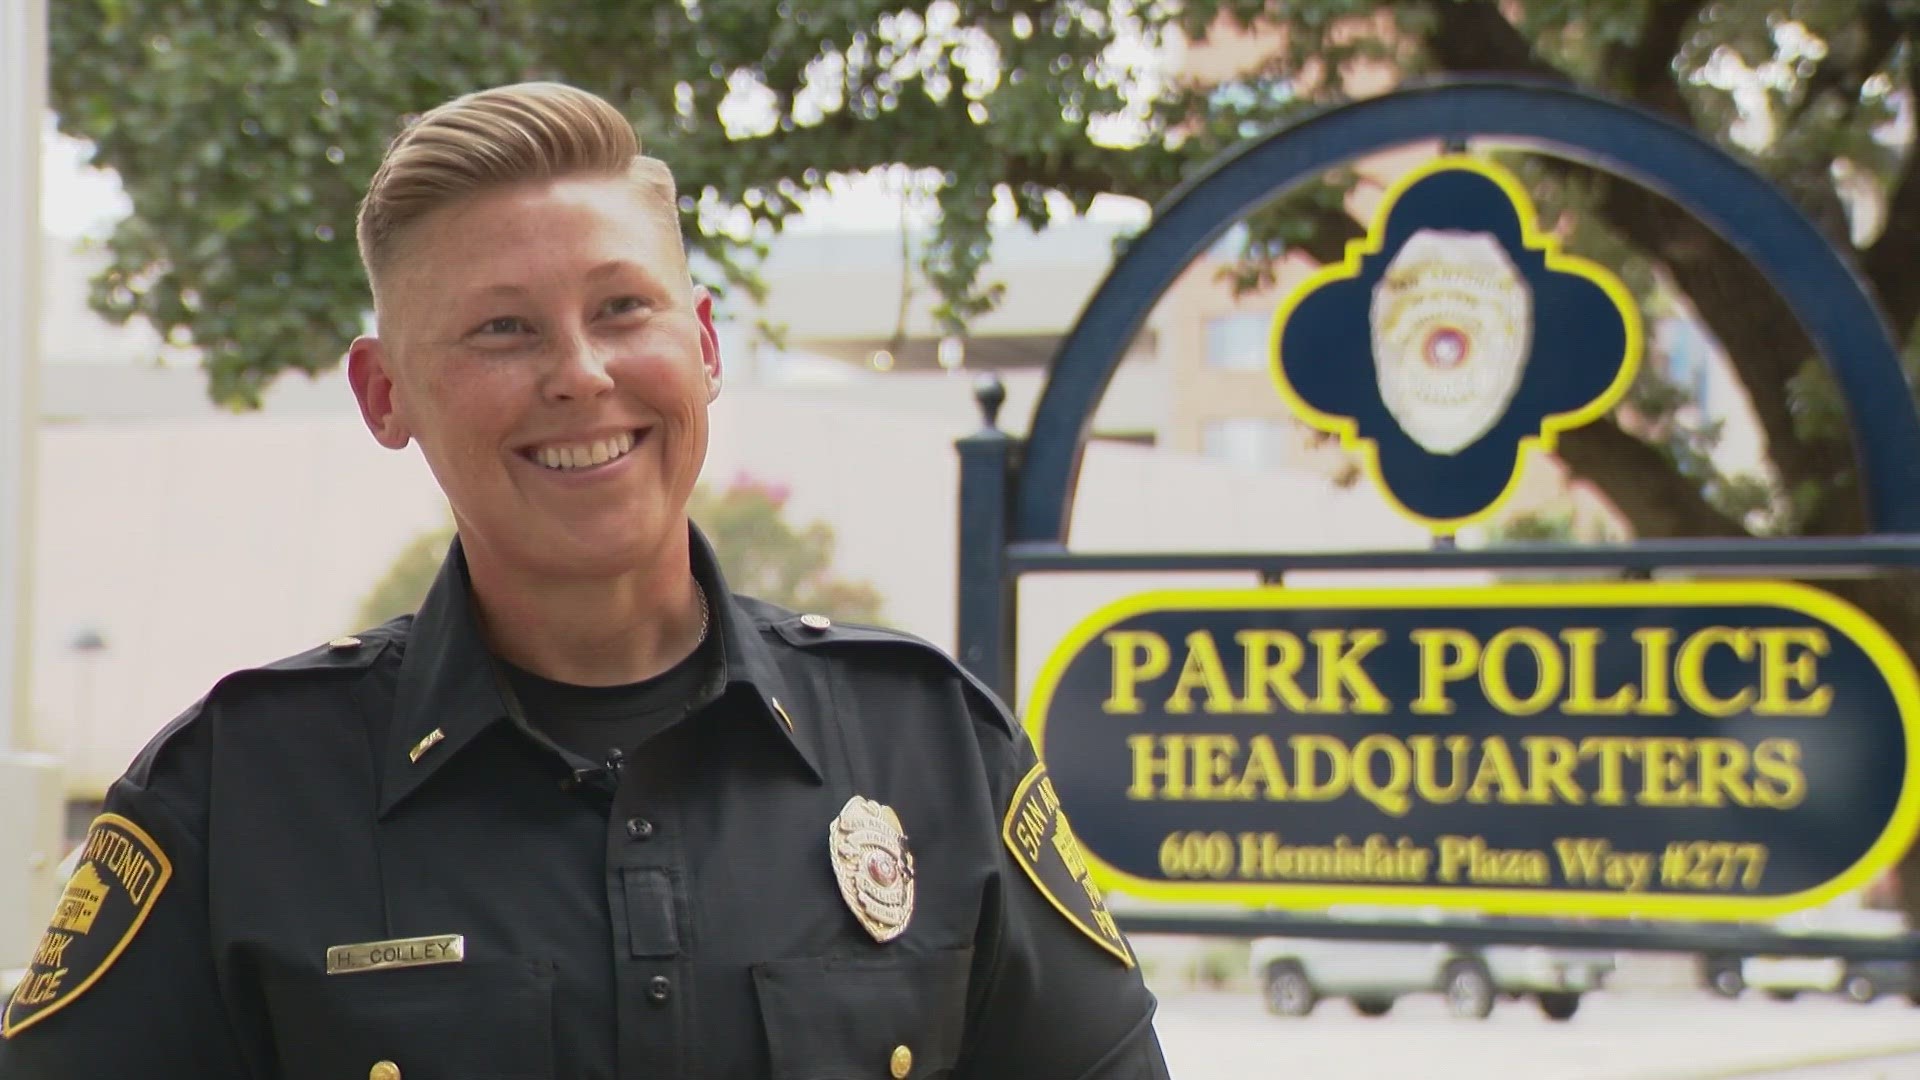 Twenty years after entering law enforcement at the age of 18, Heather Colley is breaking barriers.